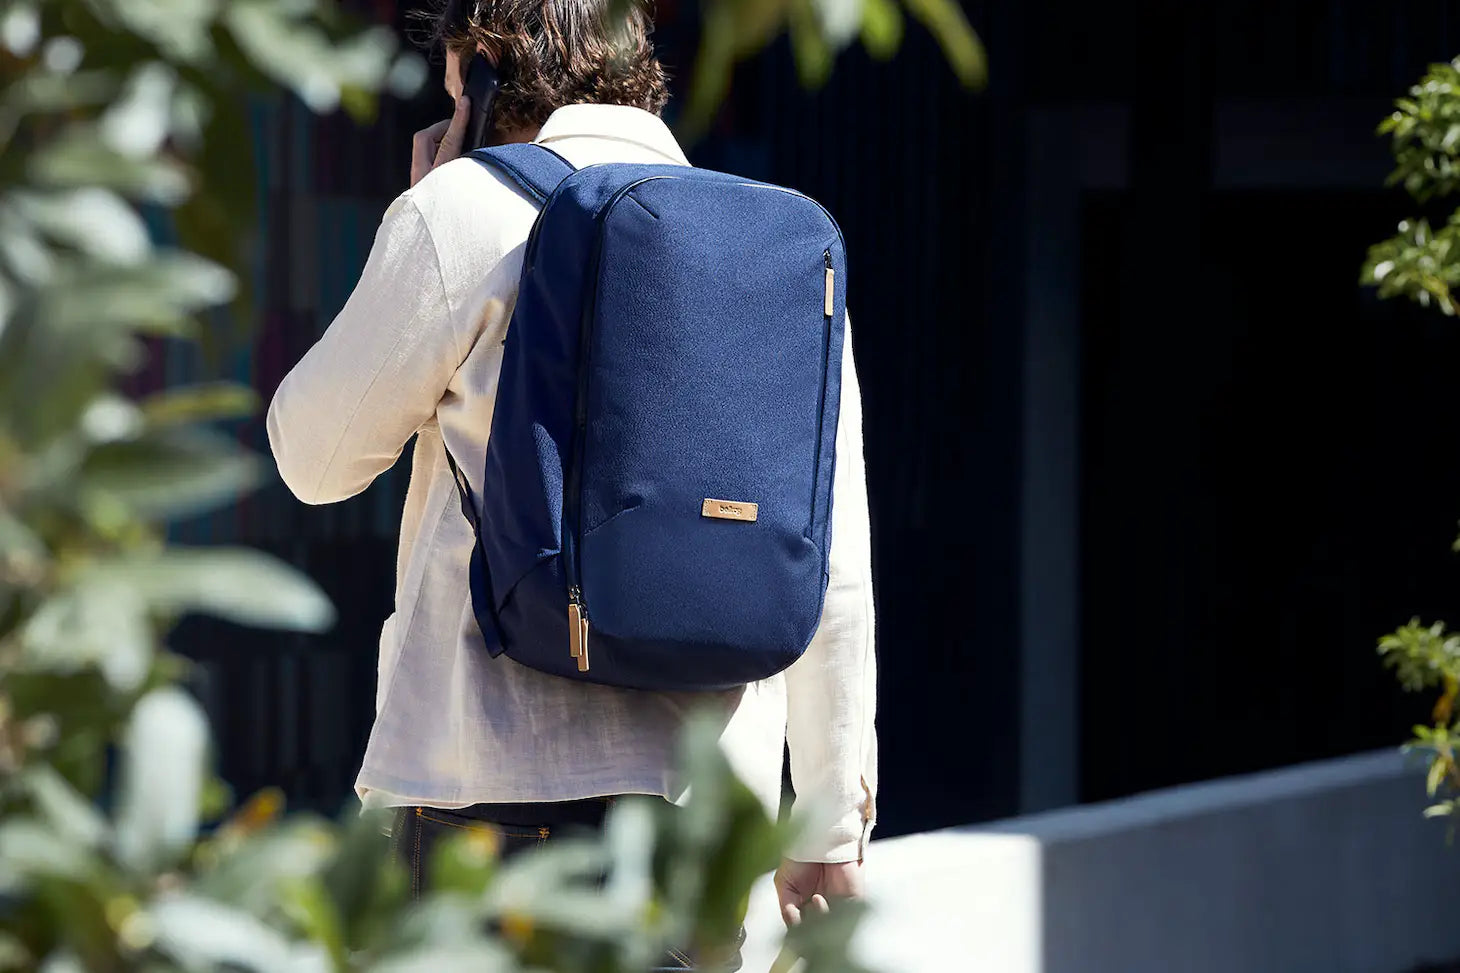 Transit Laptop Backpack - More Capacity for Everyday